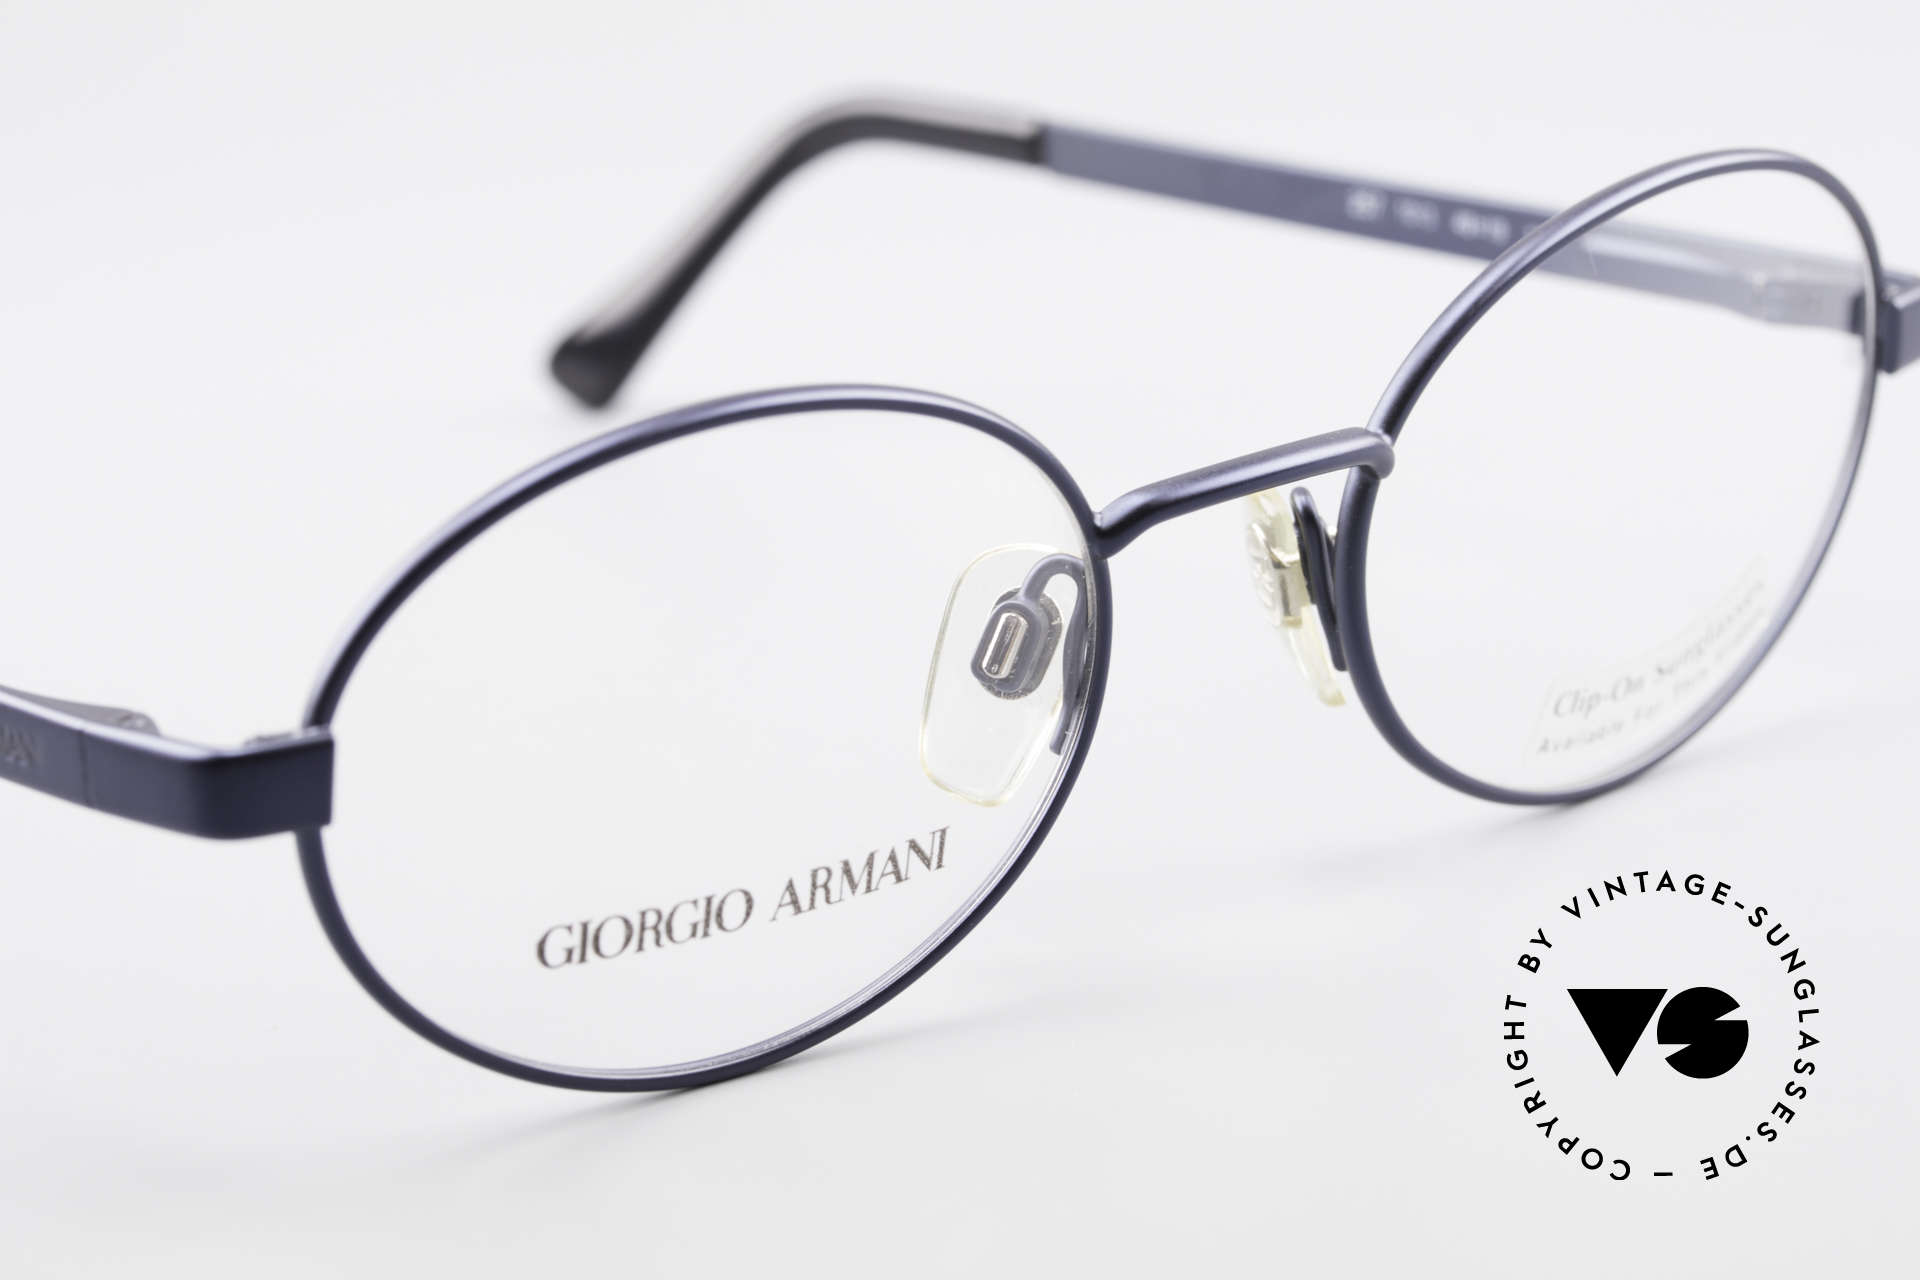 Giorgio Armani 257 90's Oval Vintage Eyeglasses, NO RETRO EYEWEAR, but a 25 years old Original, Made for Men and Women